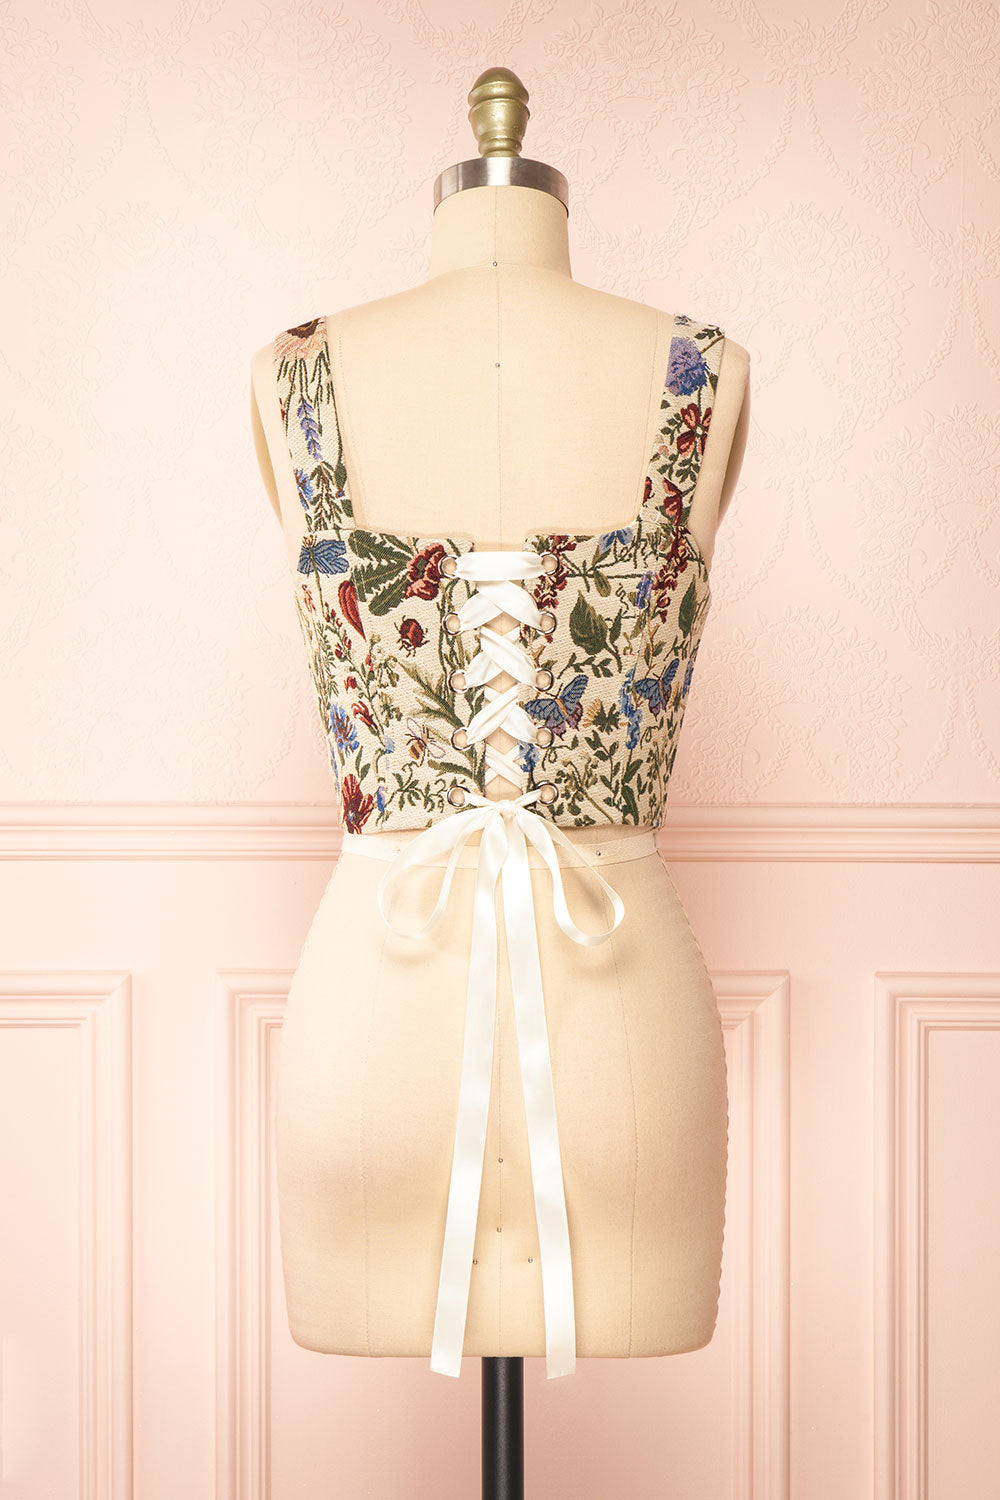 Floral Corset Top – www.